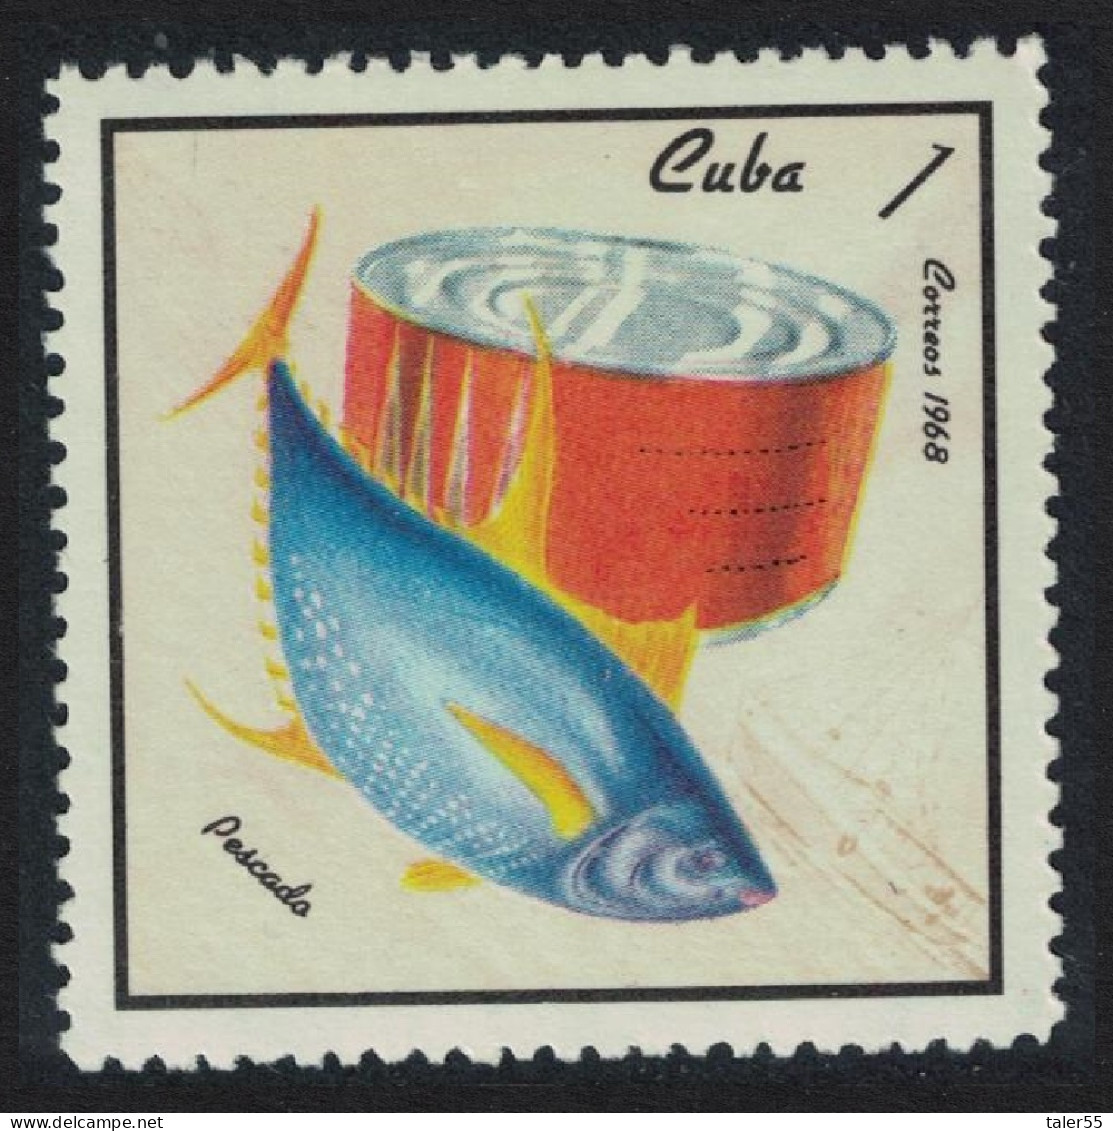 Caribic Canned Fish Food Products 1968 MNH SG#1582 - Unused Stamps